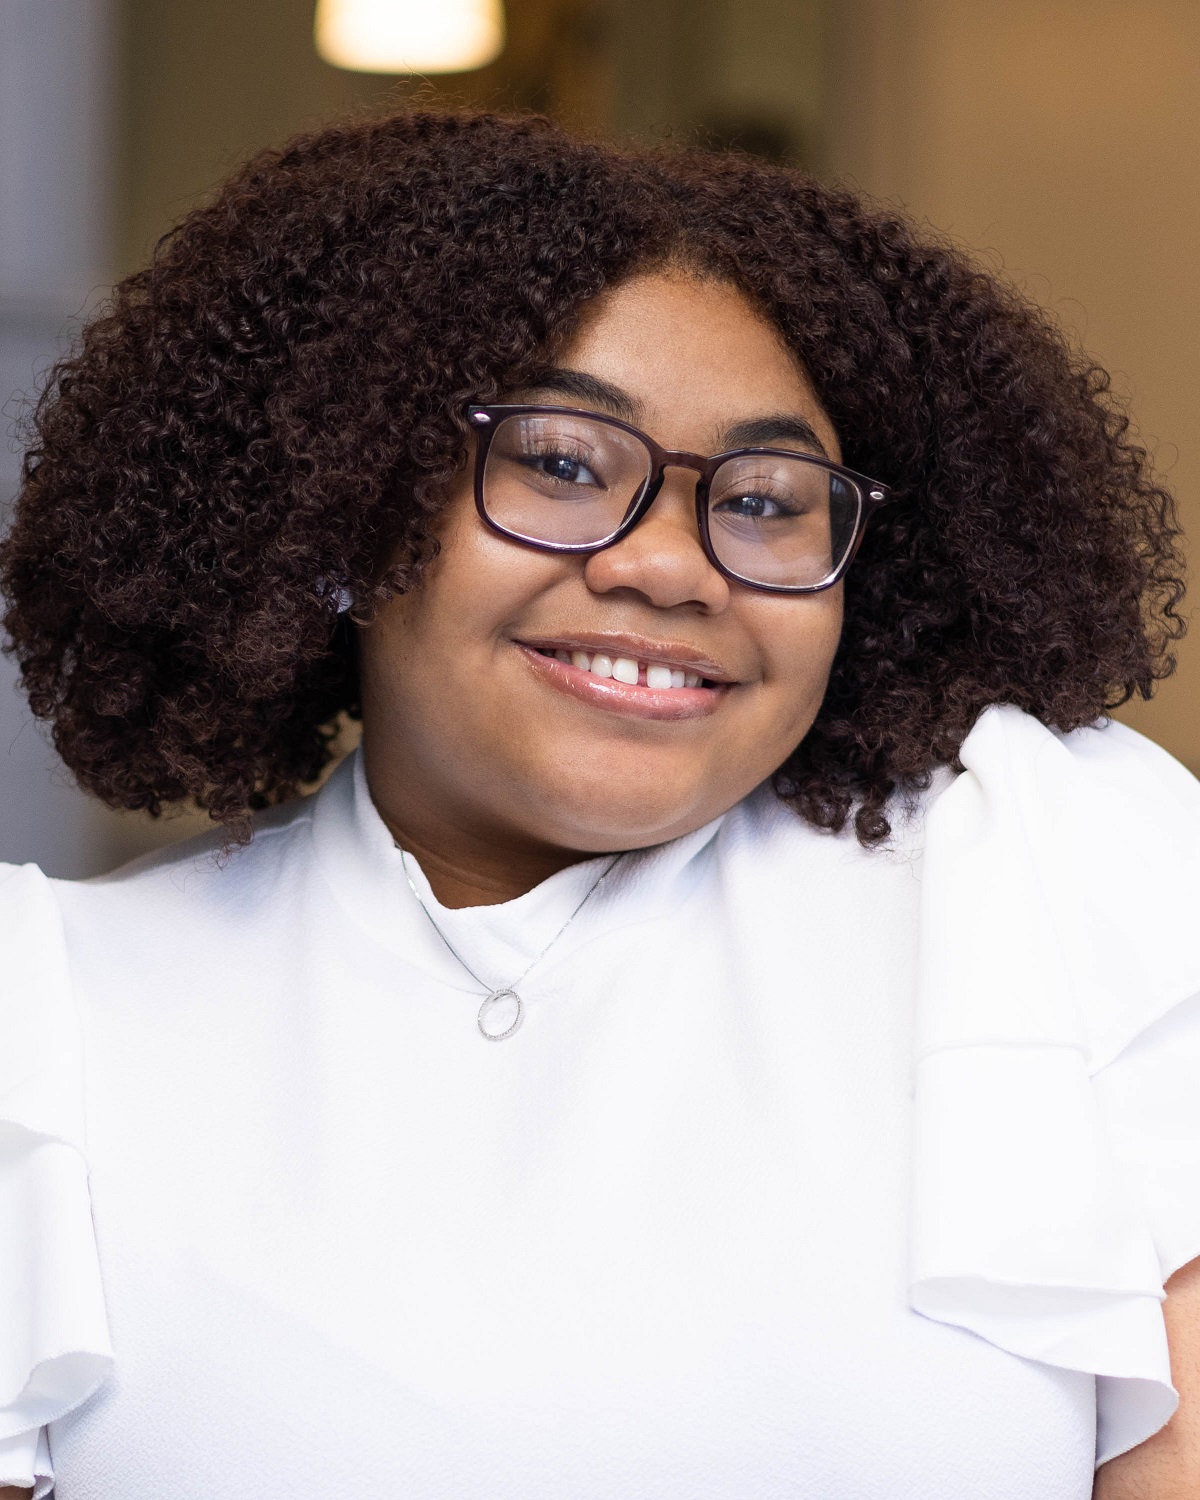 Hudson County Community College graduate Angel Beebe, who will attend Smith College this fall, is the recipient of the 2022 Kaplan Leadership Scholarship.